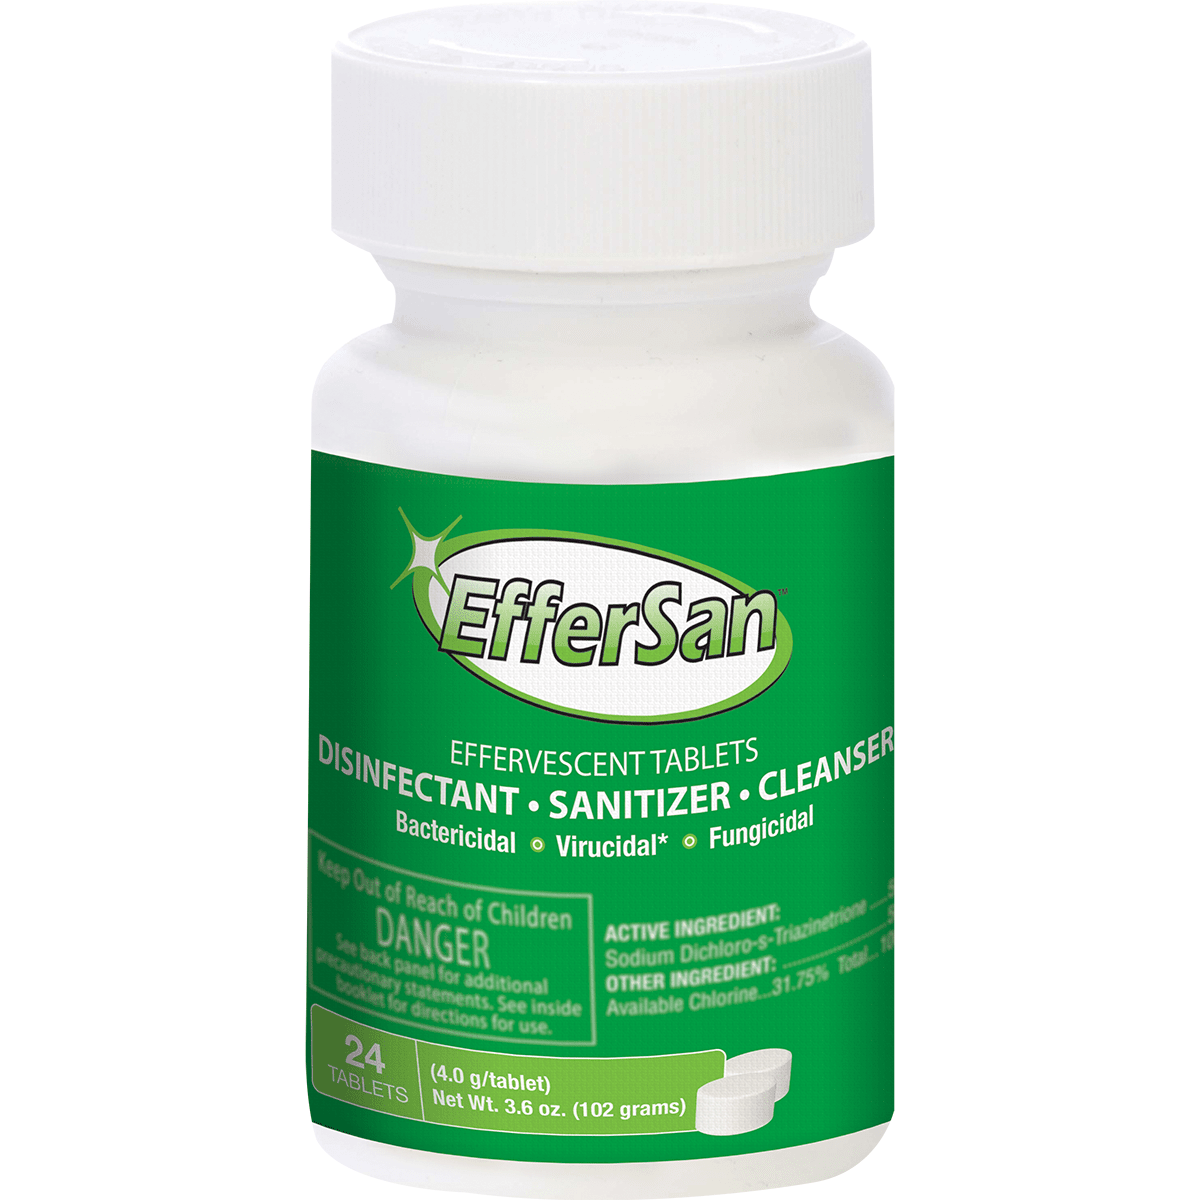 EfferSan HOCI Disinfectant Tablets - 4g - 24 Count